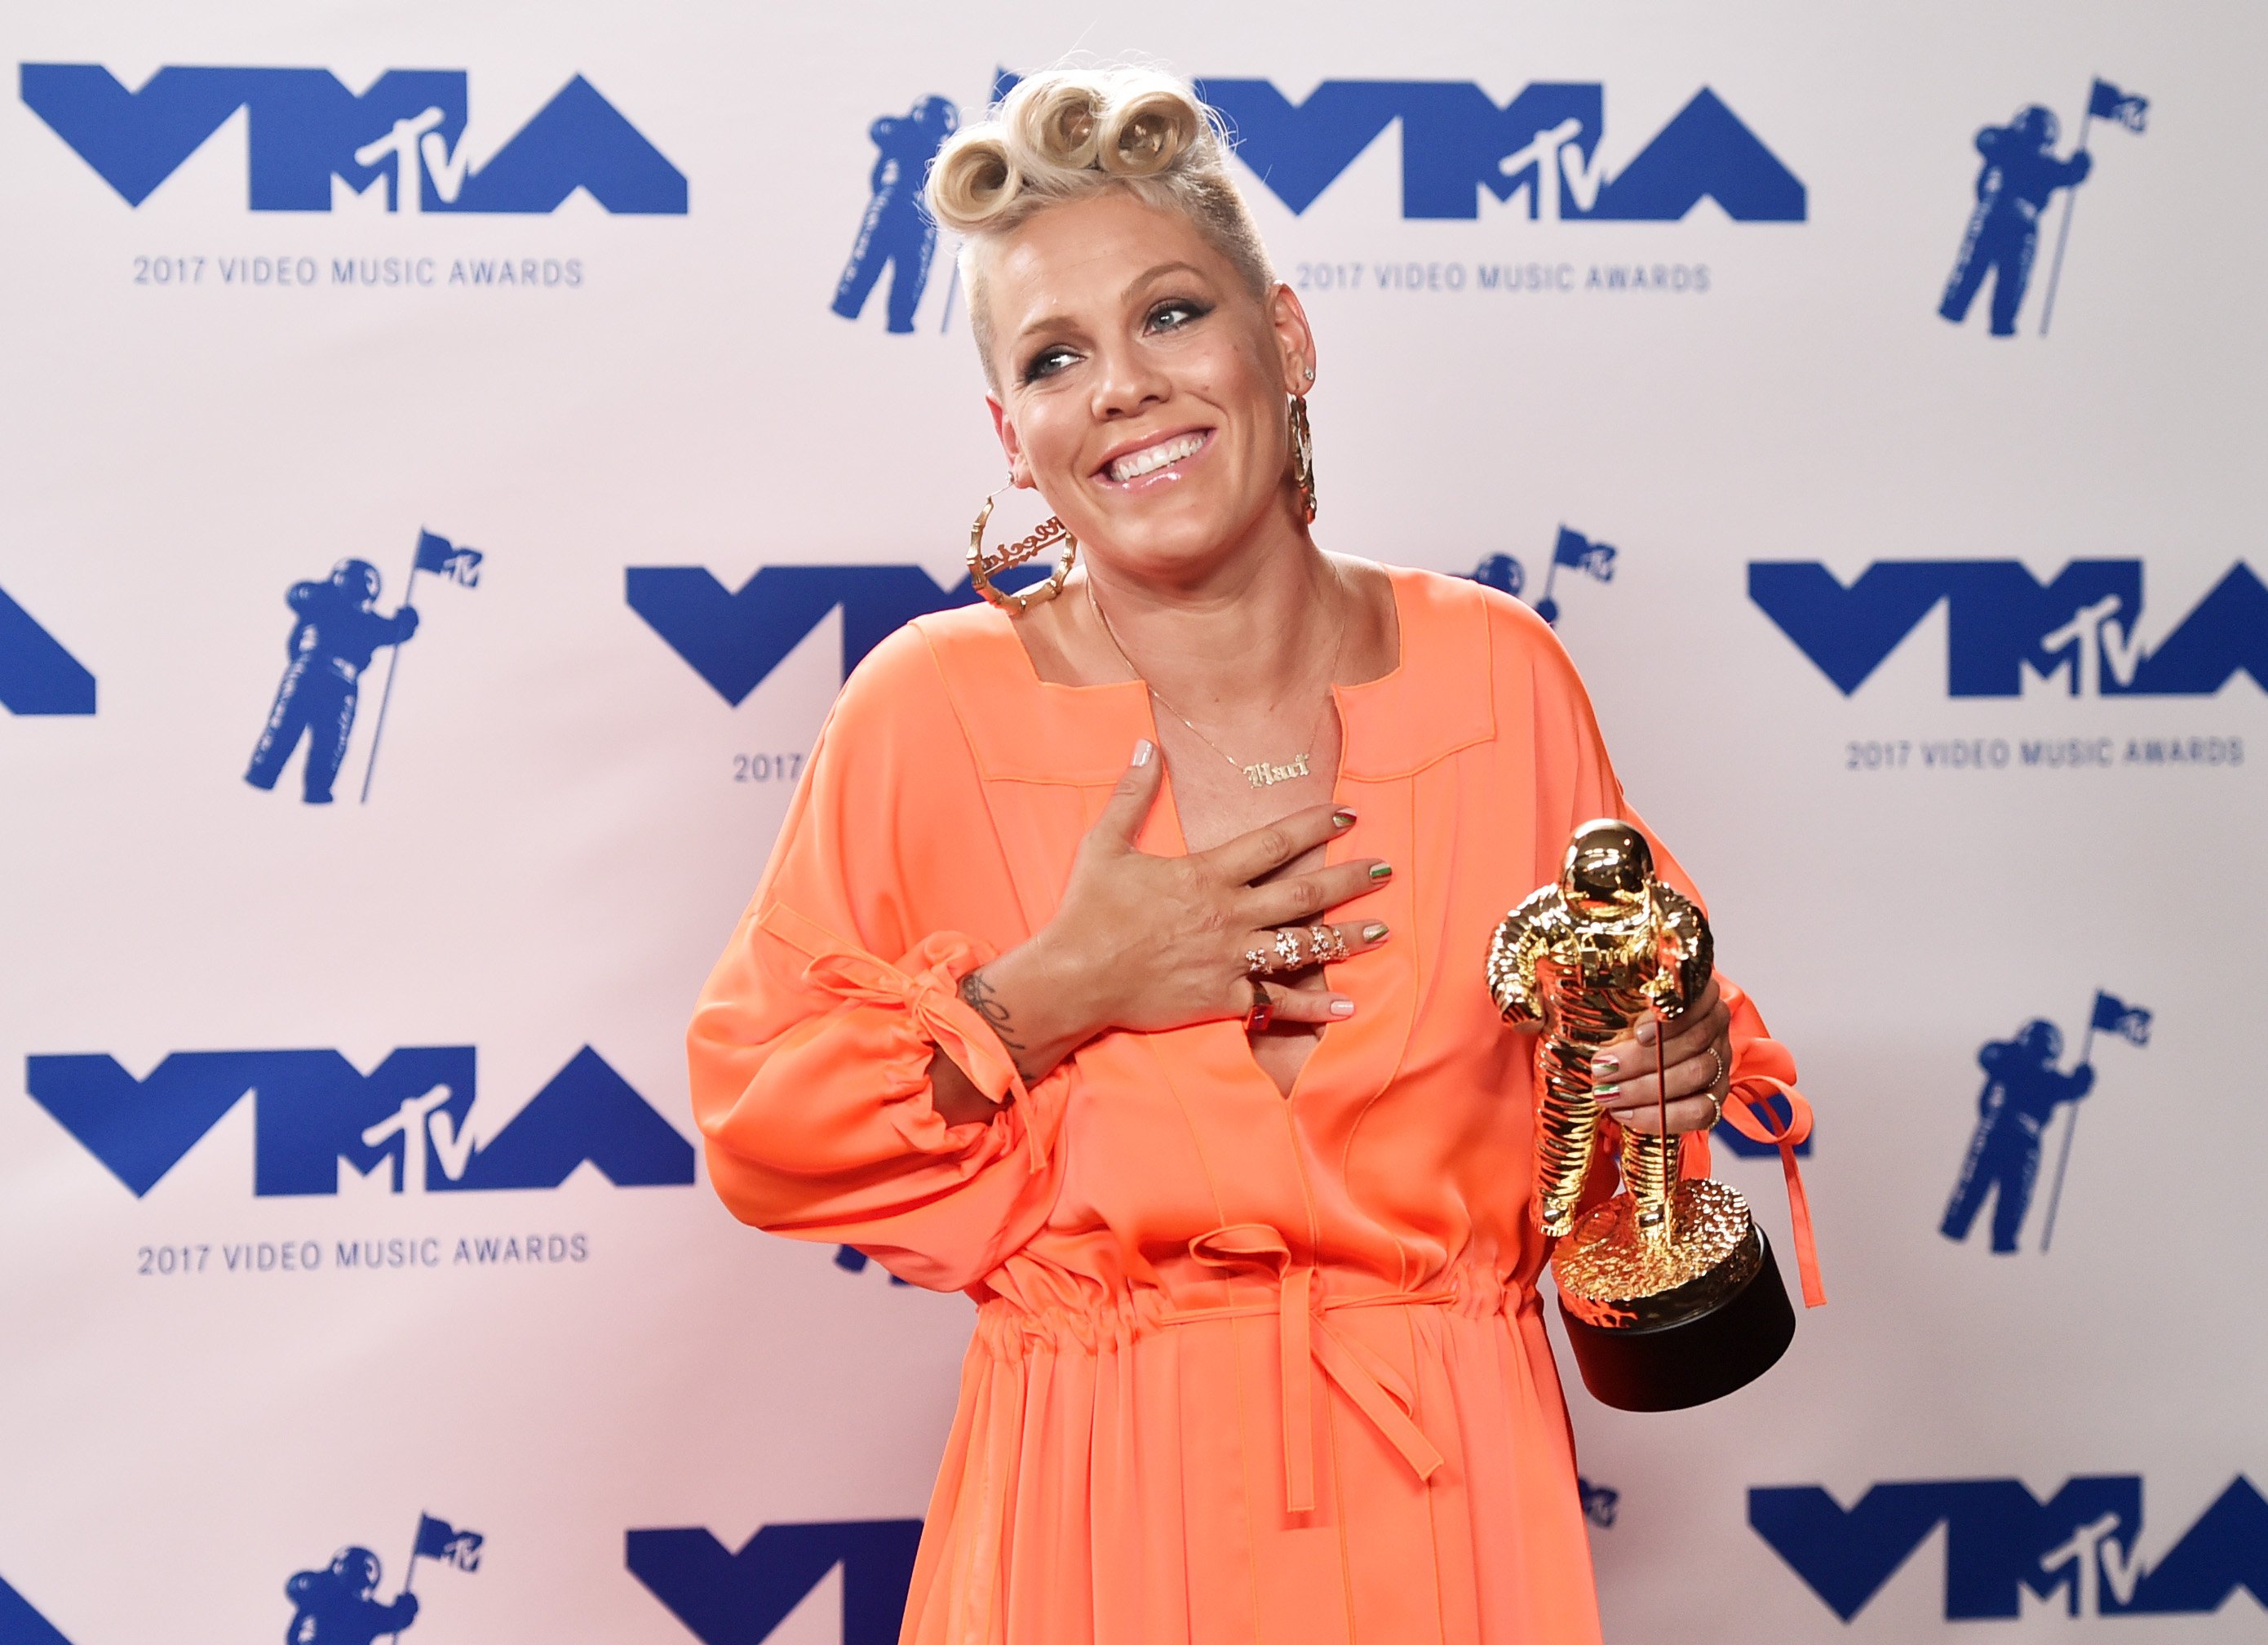 Singer Pink faces the press after she was awarded with a Michael Jackson Video Vanguard Award in 2017. | Photo: Getty Images